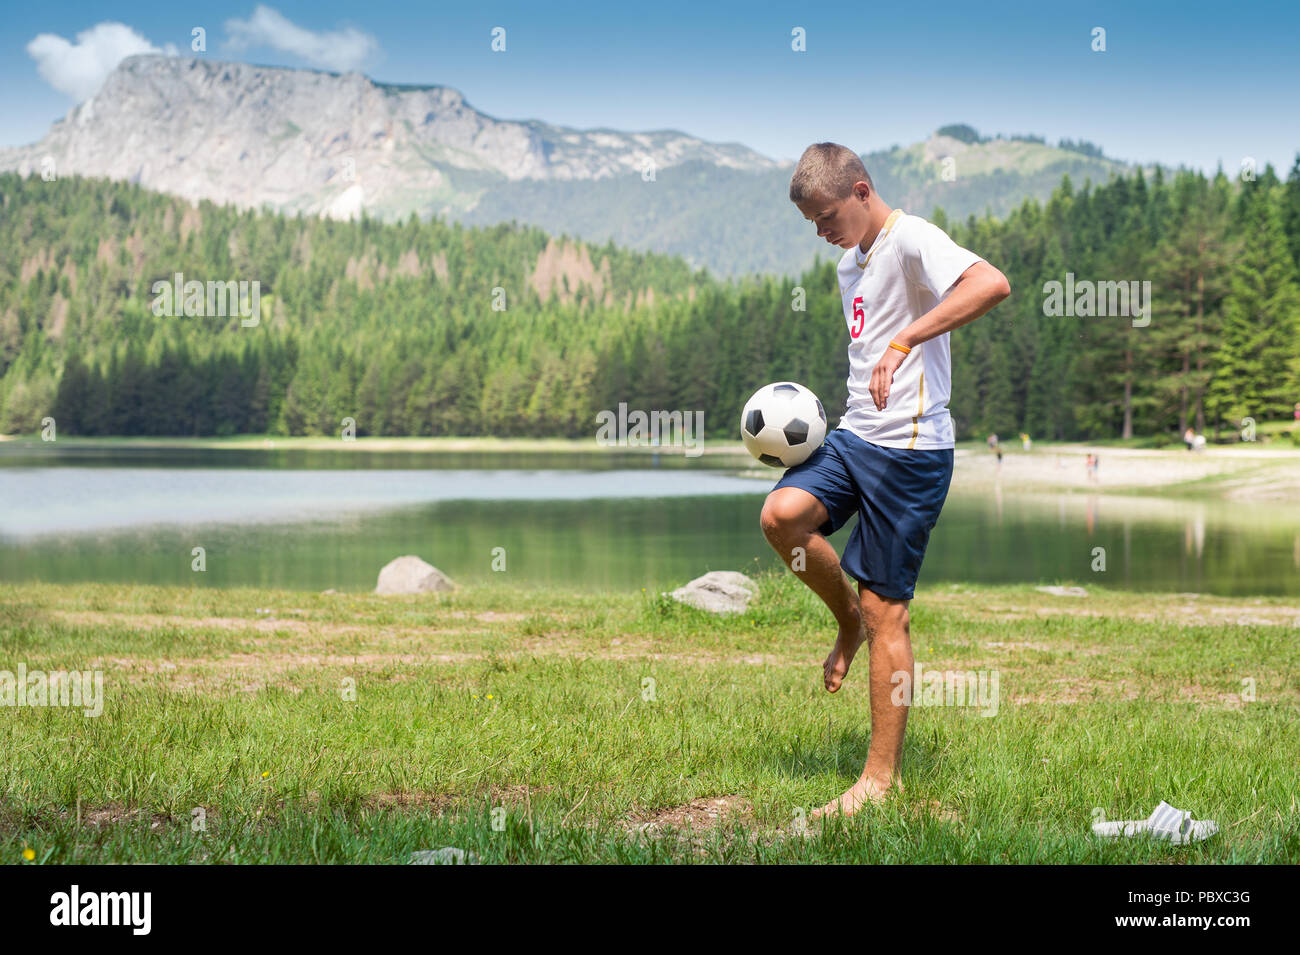 Soccer player juggles the ball in nature Stock Photo